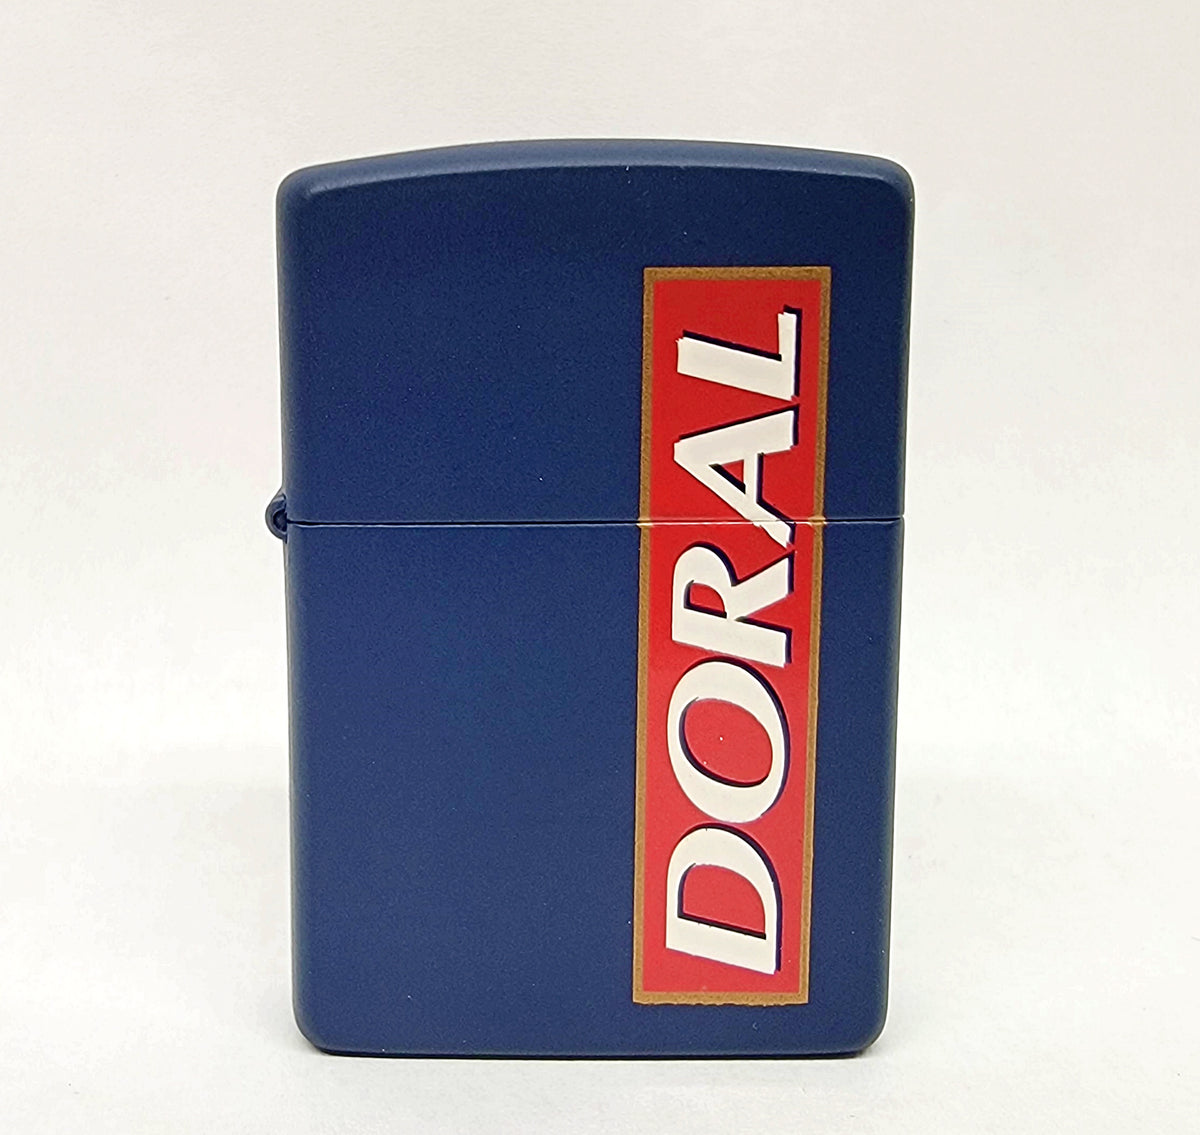 New XIII 1997 Doral Cigarettes Blue Matte Zippo Lighter - Hers and His Treasures